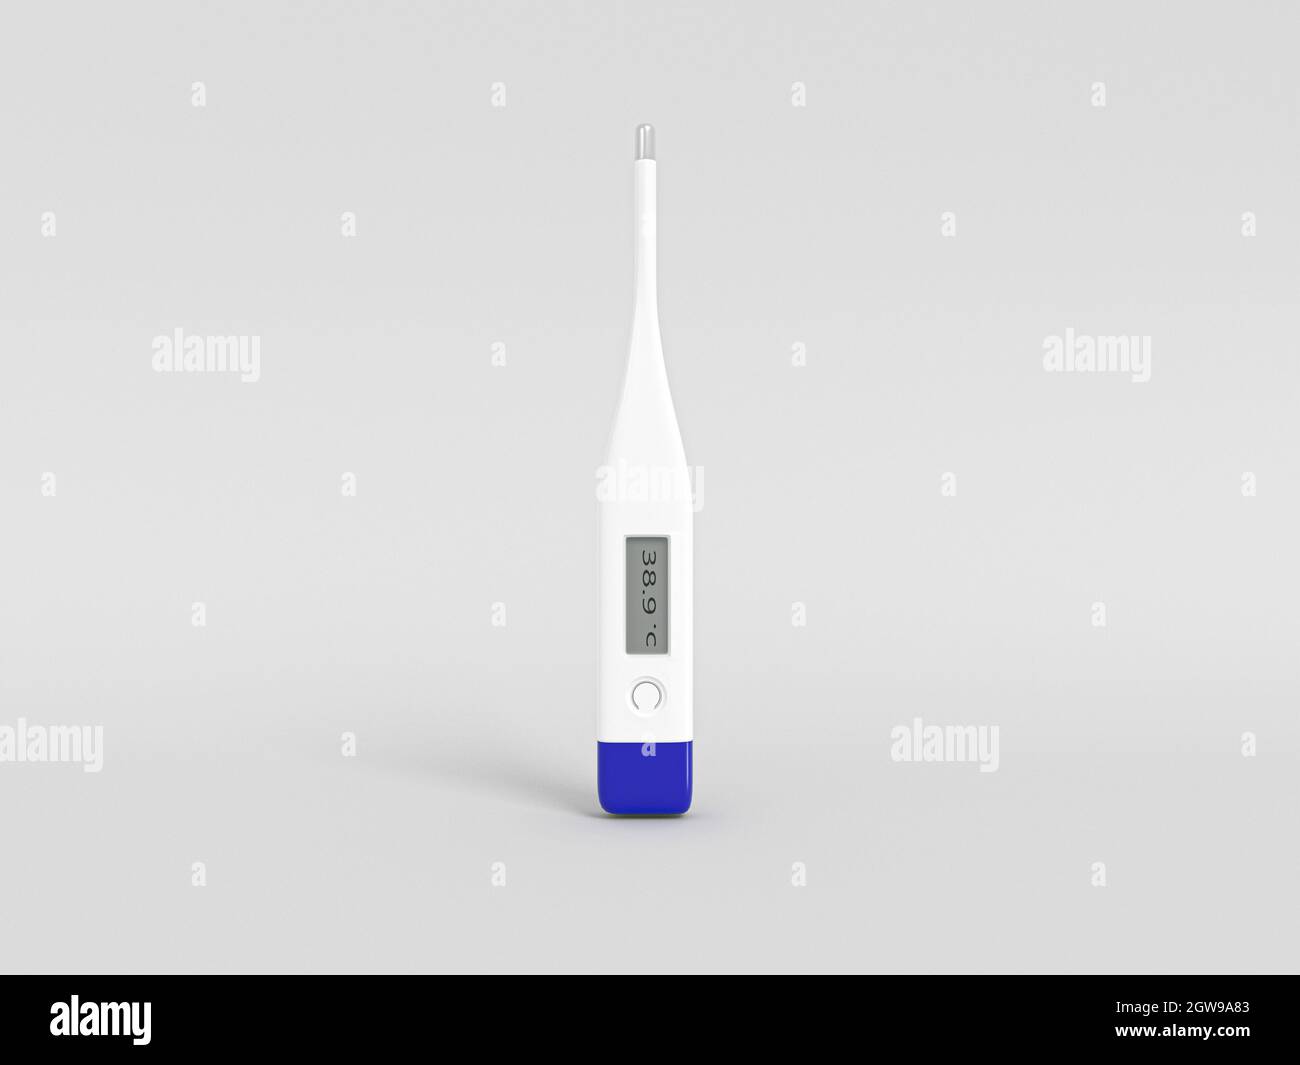 https://c8.alamy.com/comp/2GW9A83/electronic-modern-clinical-digital-thermometer-temperature-measurement-device-3d-illustration-fever-diagnostic-and-healthcare-concept-2GW9A83.jpg